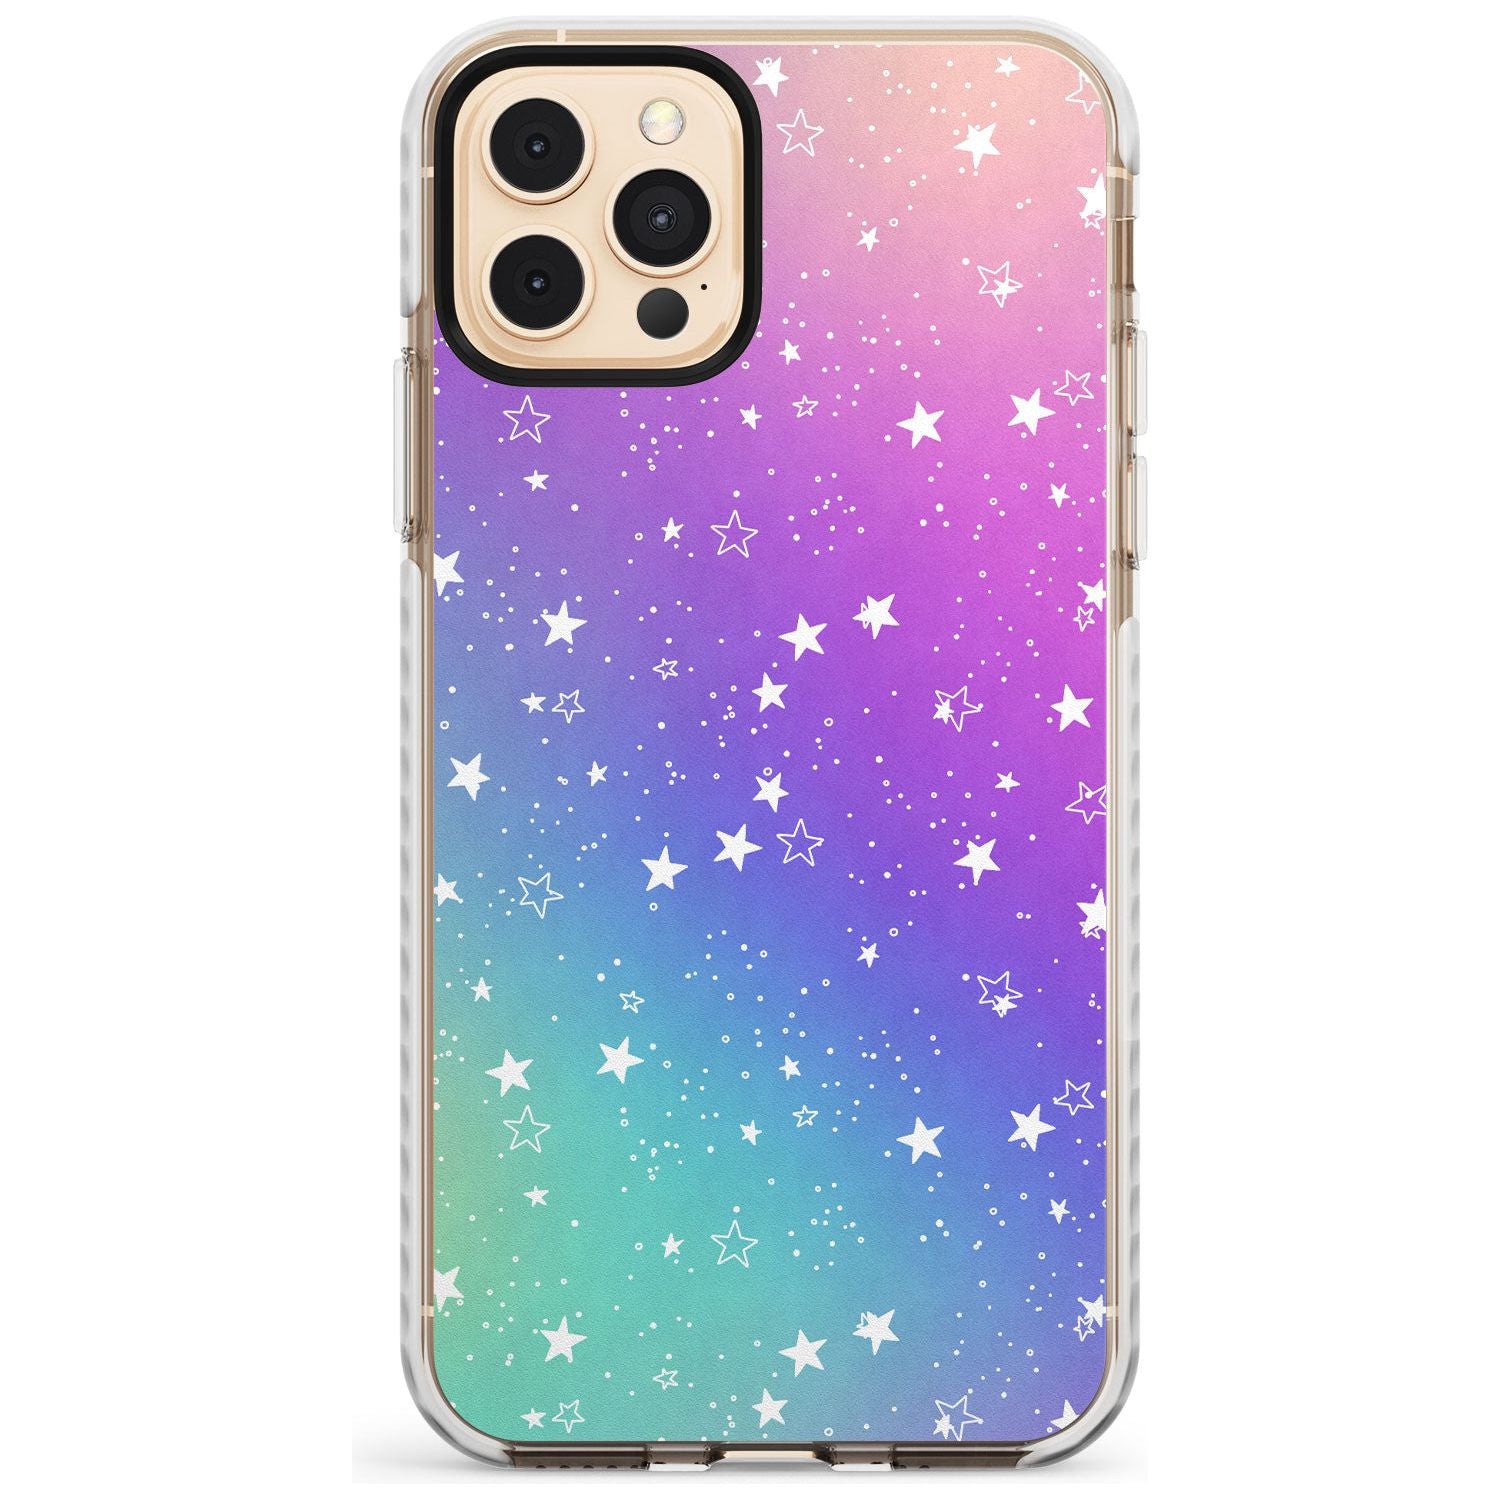 White Stars on Pastels Slim TPU Phone Case for iPhone 11 Pro Max